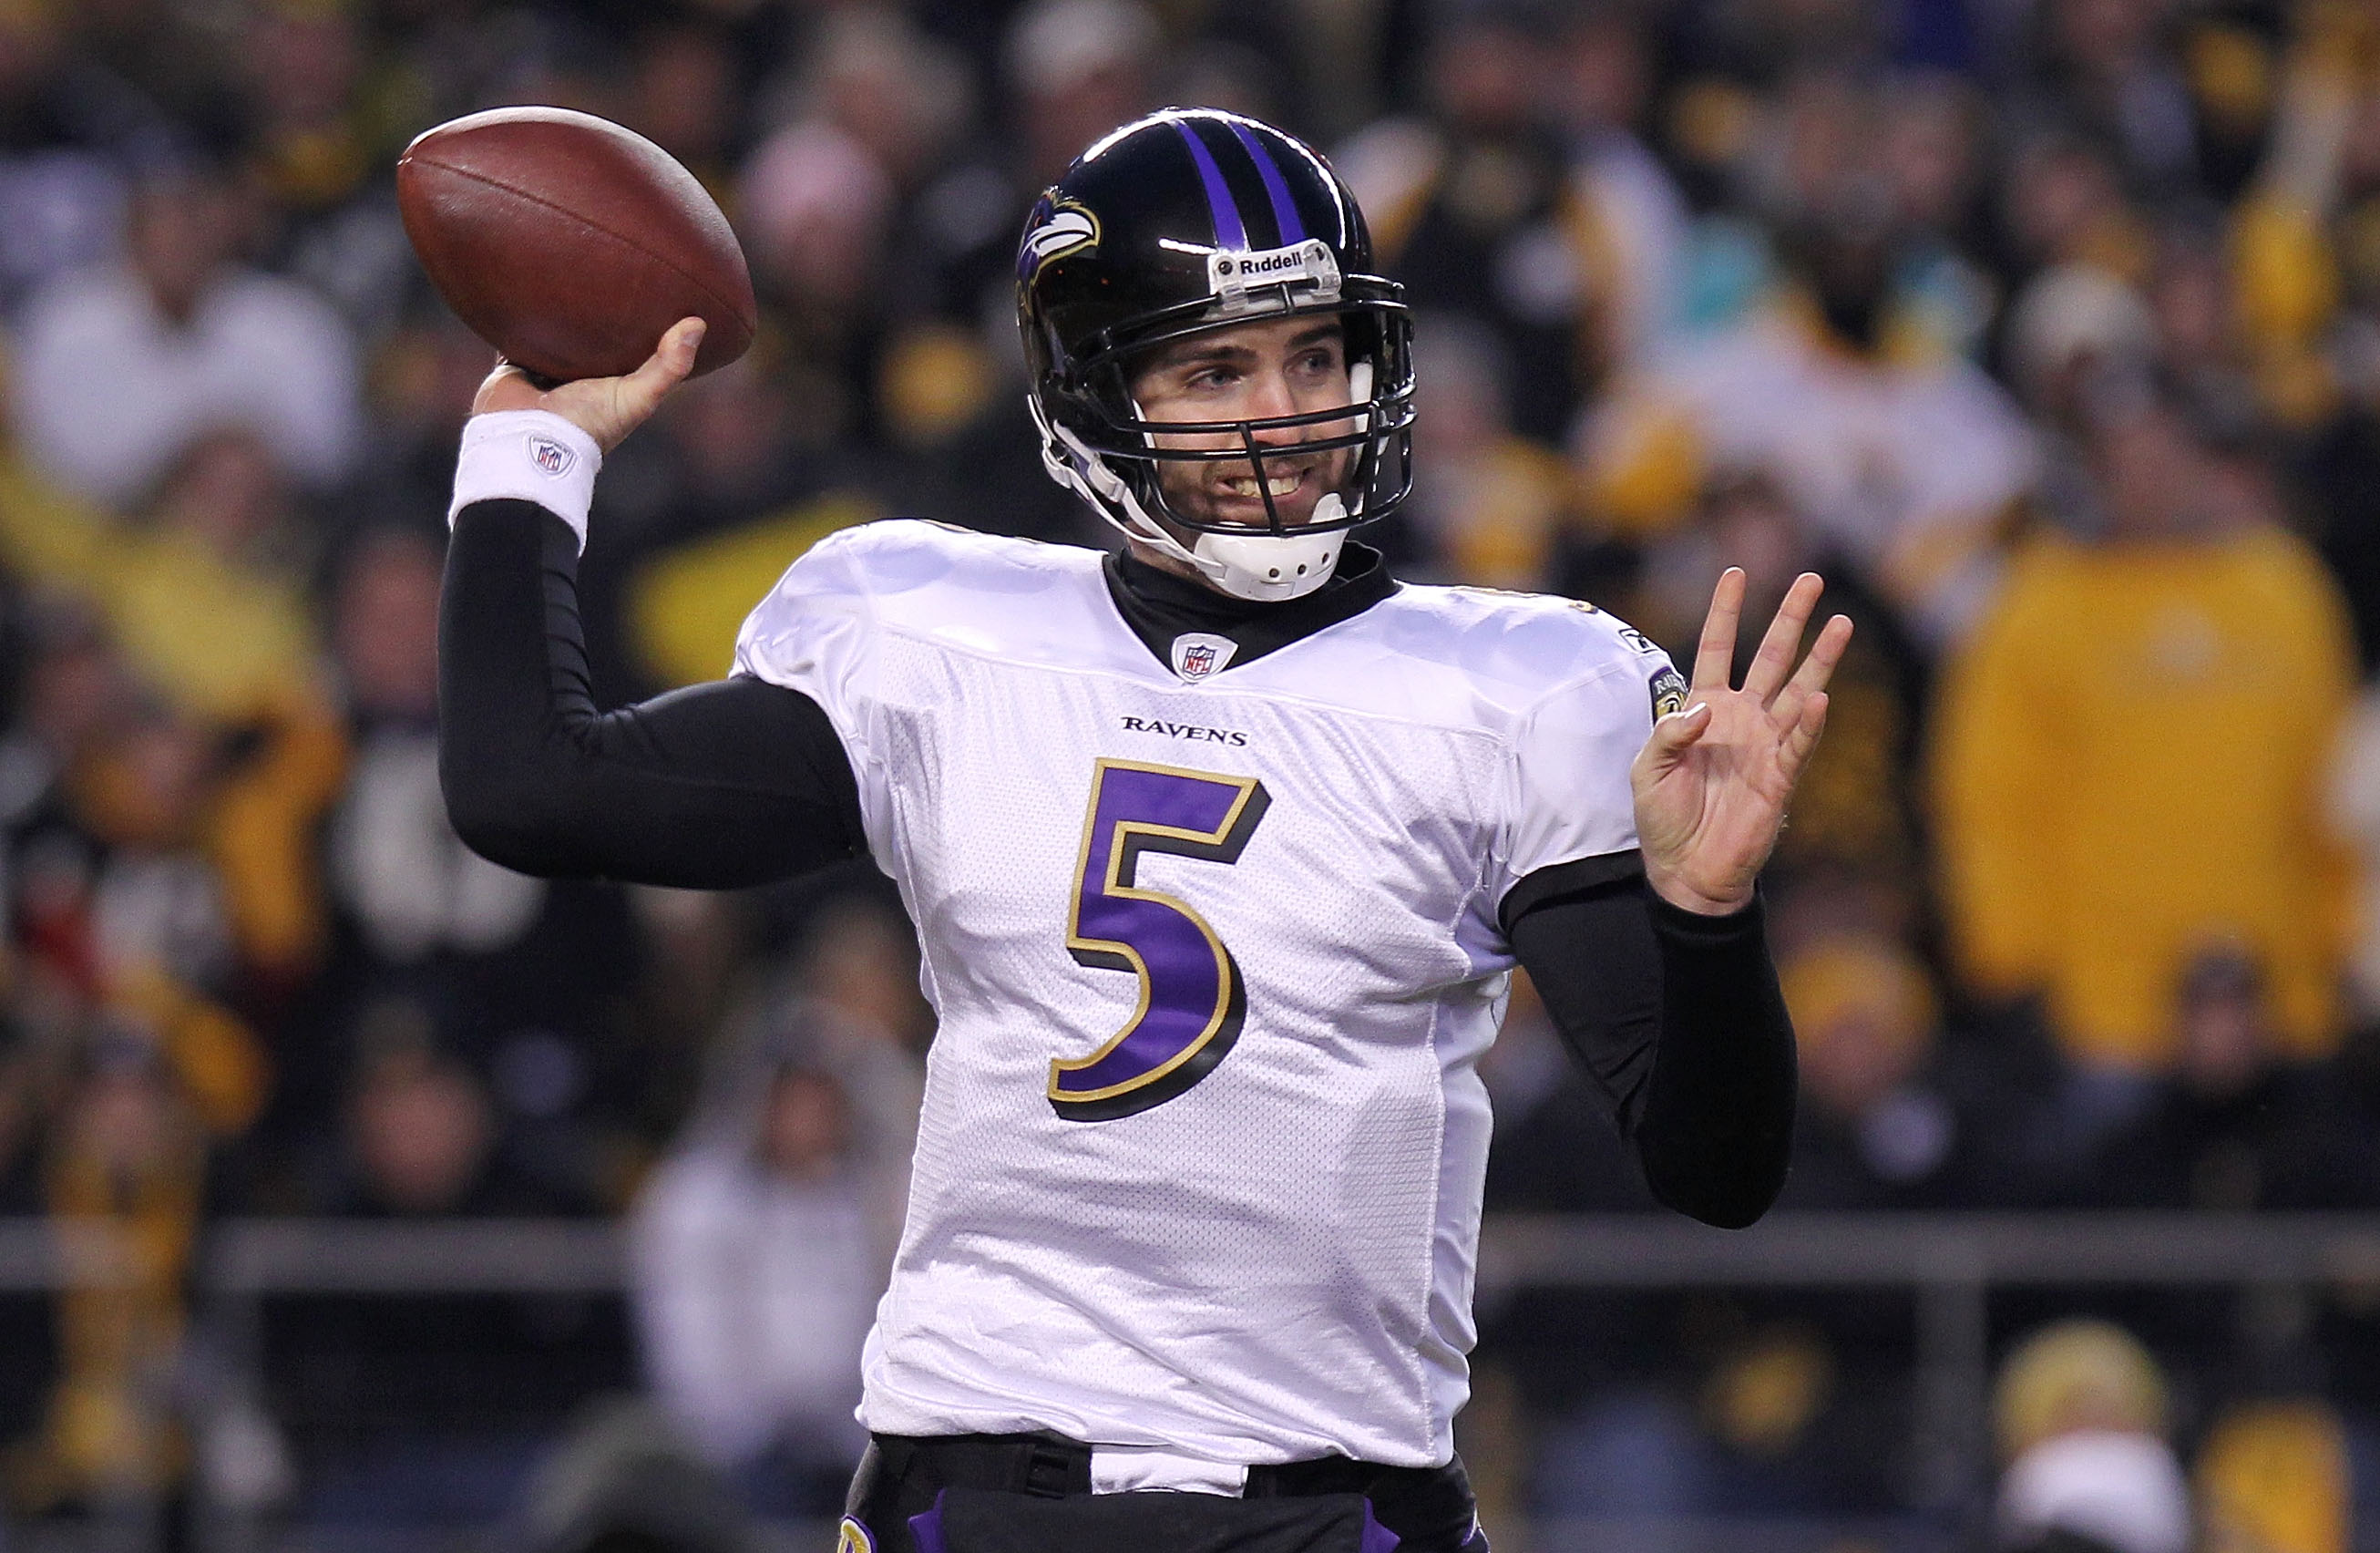 PITTSBURGH, PA - JANUARY 15:  Quarterback Joe Flacco #5 of the Baltimore Ravens looks to pass against the Pittsburgh Steelers in the AFC Divisional Playoff Game at Heinz Field on January 15, 2011 in Pittsburgh, Pennsylvania.  (Photo by Nick Laham/Getty Im